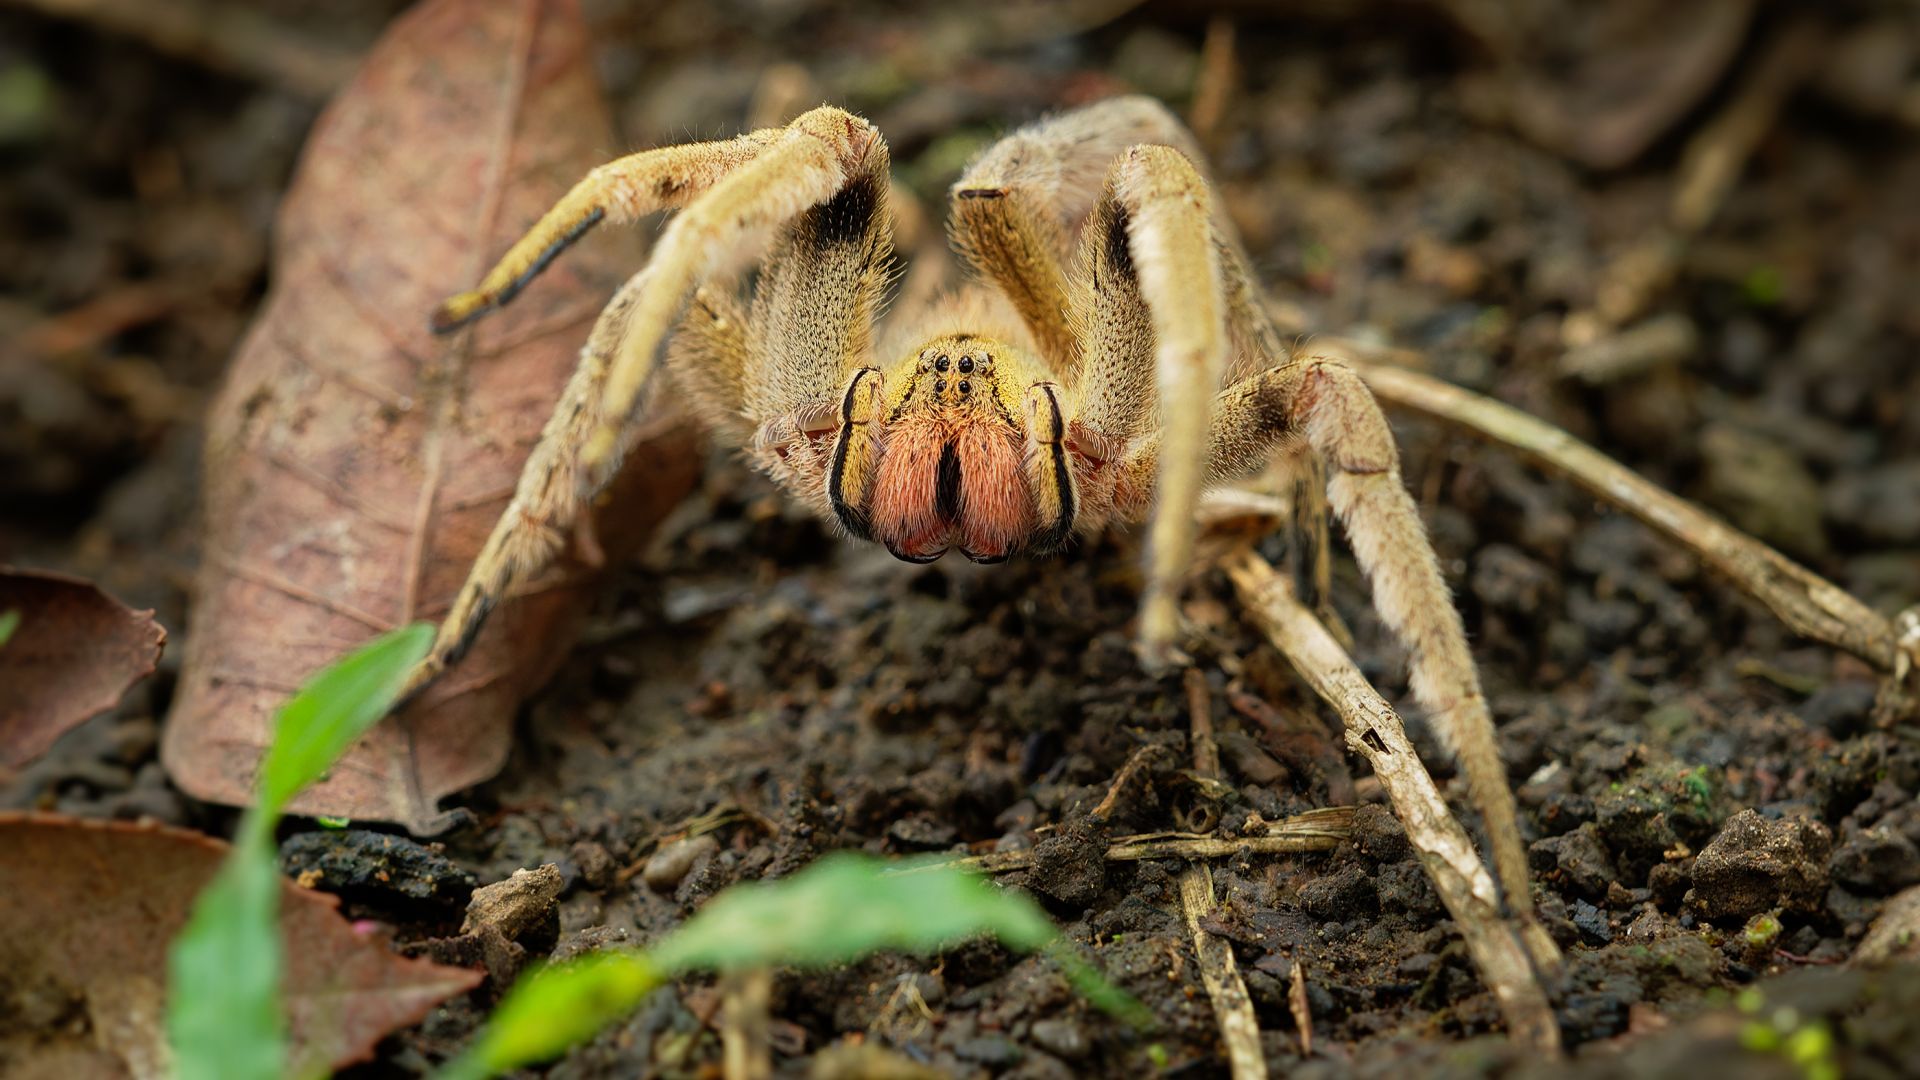 <p>                     Commonly referred to as armed spiders or banana spiders (as they tend to be found hiding within shipments of bananas), the Brazilian wandering spider is one that you'll definitely want to avoid. They belong to the genus <em>Phoneutria</em>, Greek for "murderess," which is quite apt as they are one of the most venomous spiders on Earth.                   </p>                                      <p>                     This arachnid is aggressive, and rather than camping out, the Brazilian wandering spider actively hunts its prey, searching the jungle floor at night. If you ever find yourself in Central and South America, such as Costa Rica or Argentina, watch out! Their neurotoxic venom is extremely painful and affects the nervous system, causing increased sweating and drooling, loss of muscle control, breathing problems, and, in some cases, unwanted prolonged erections.                   </p>